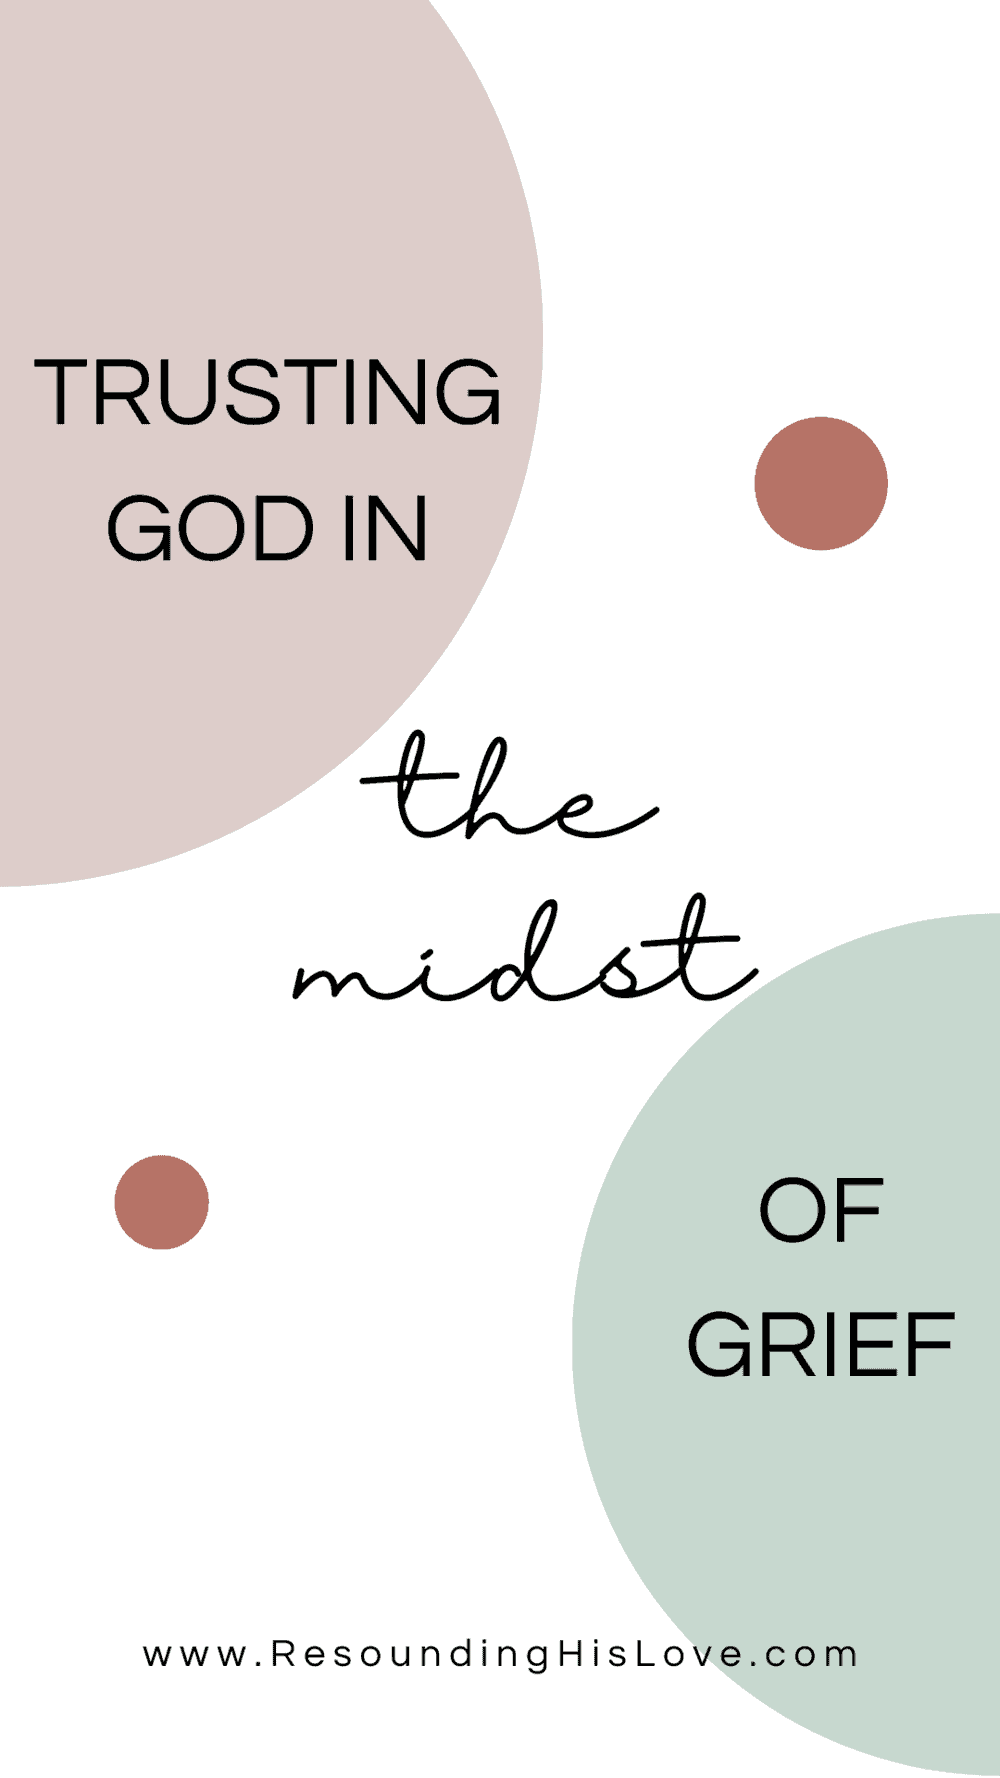 white sign with light green and brown circle at both ends with text Trusting God in the Midst of Grief